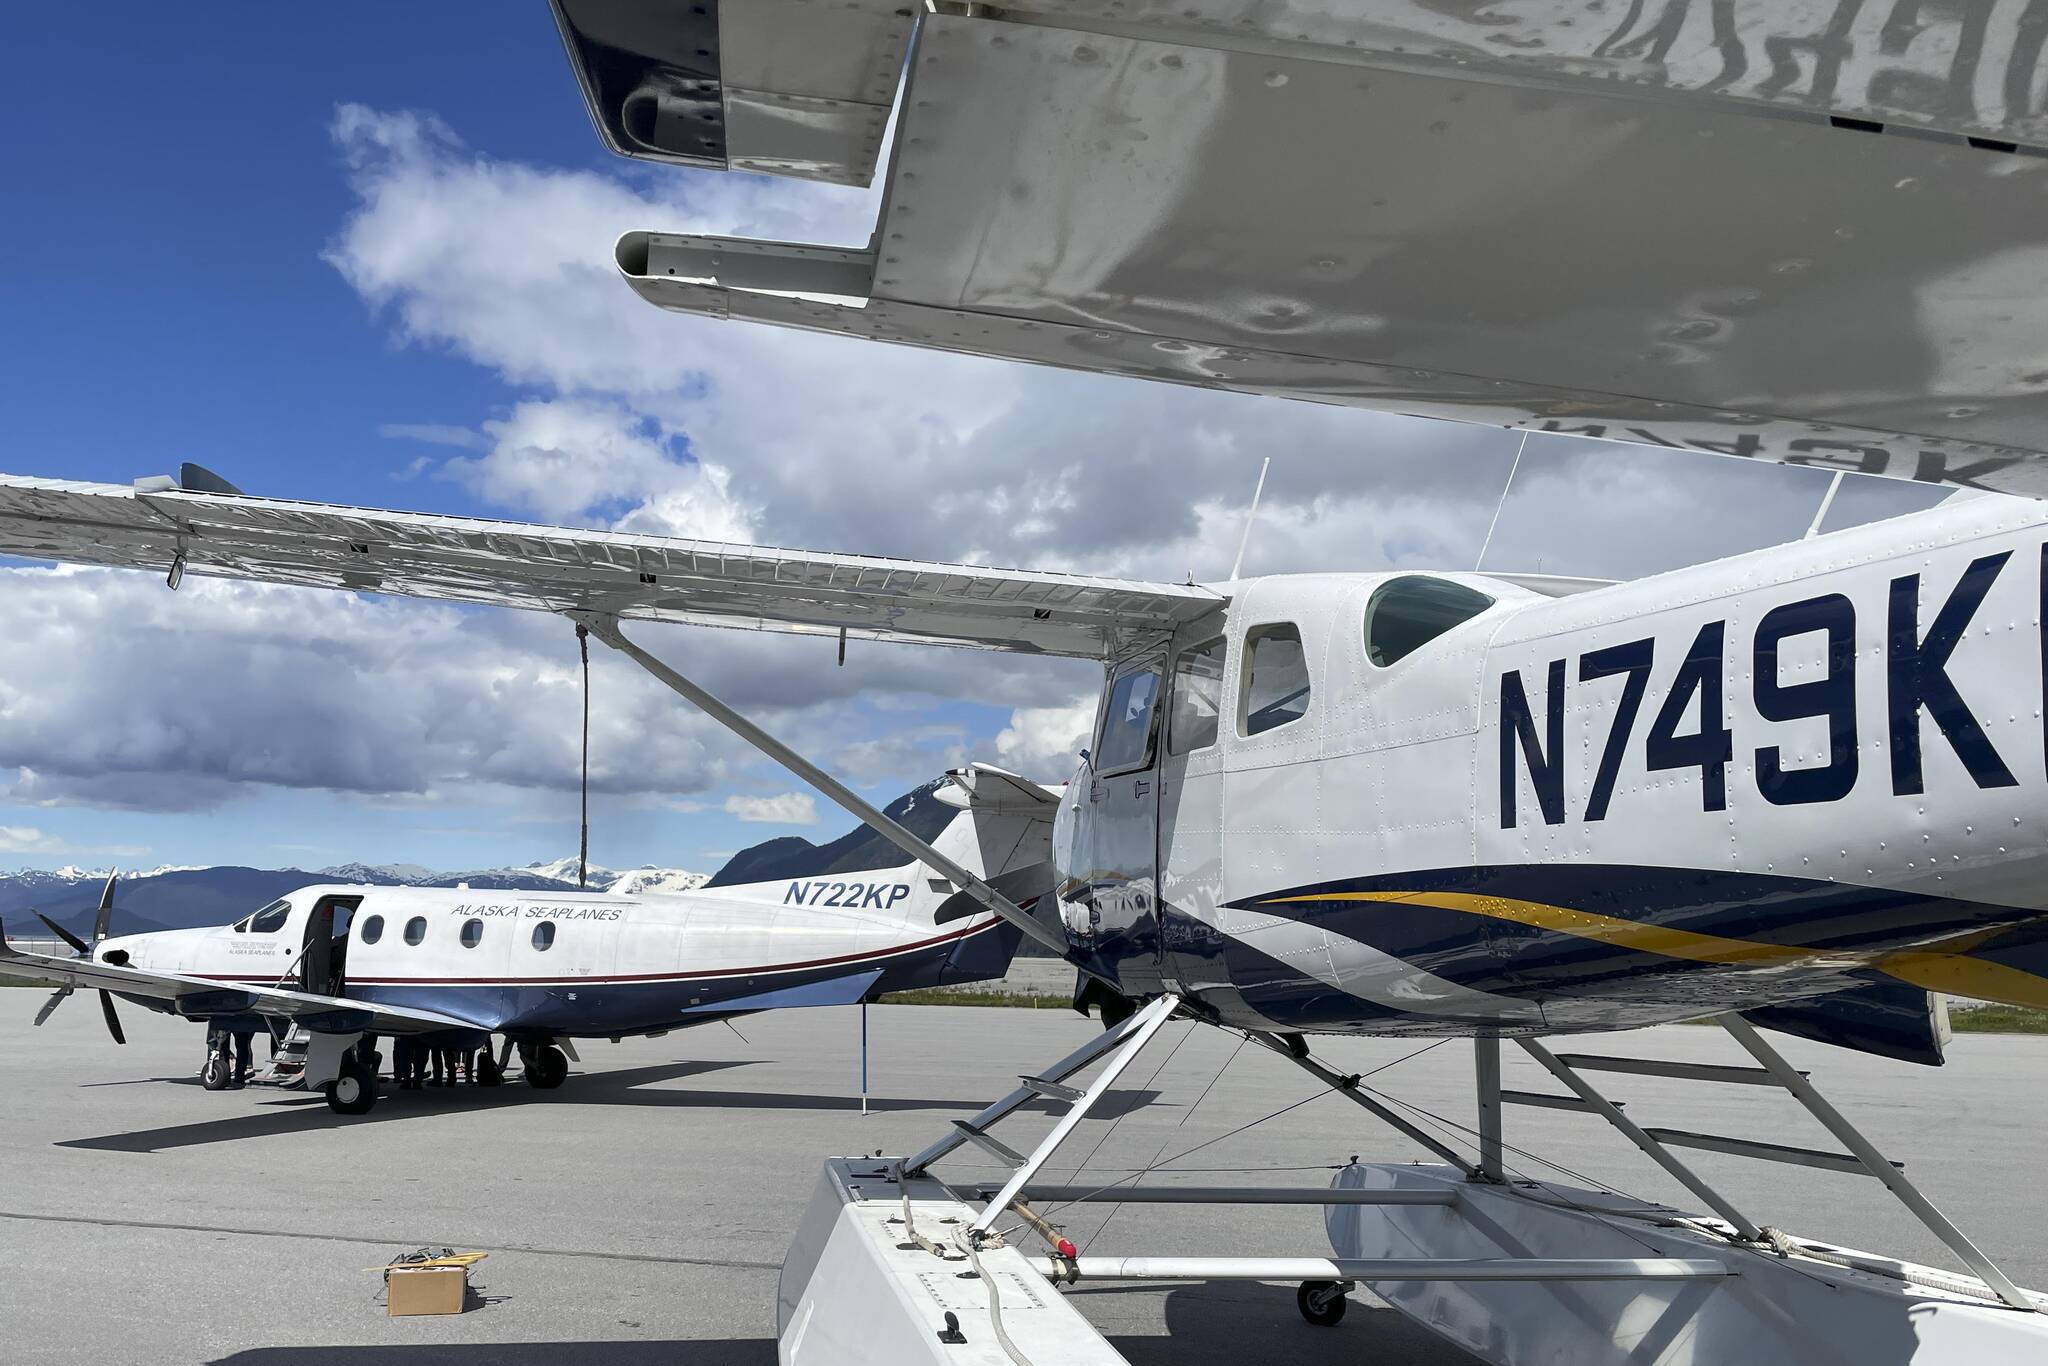 Alaska Seaplanes aircraft sit on the flight line during an event celebrating the company’s debut of service to Wrangell on May 26. 2022. The company announced this week it is cancelling service to Wrangell and Petersburg as of Nov. 1. (Michael S. Lockett / Juneau Empire File)